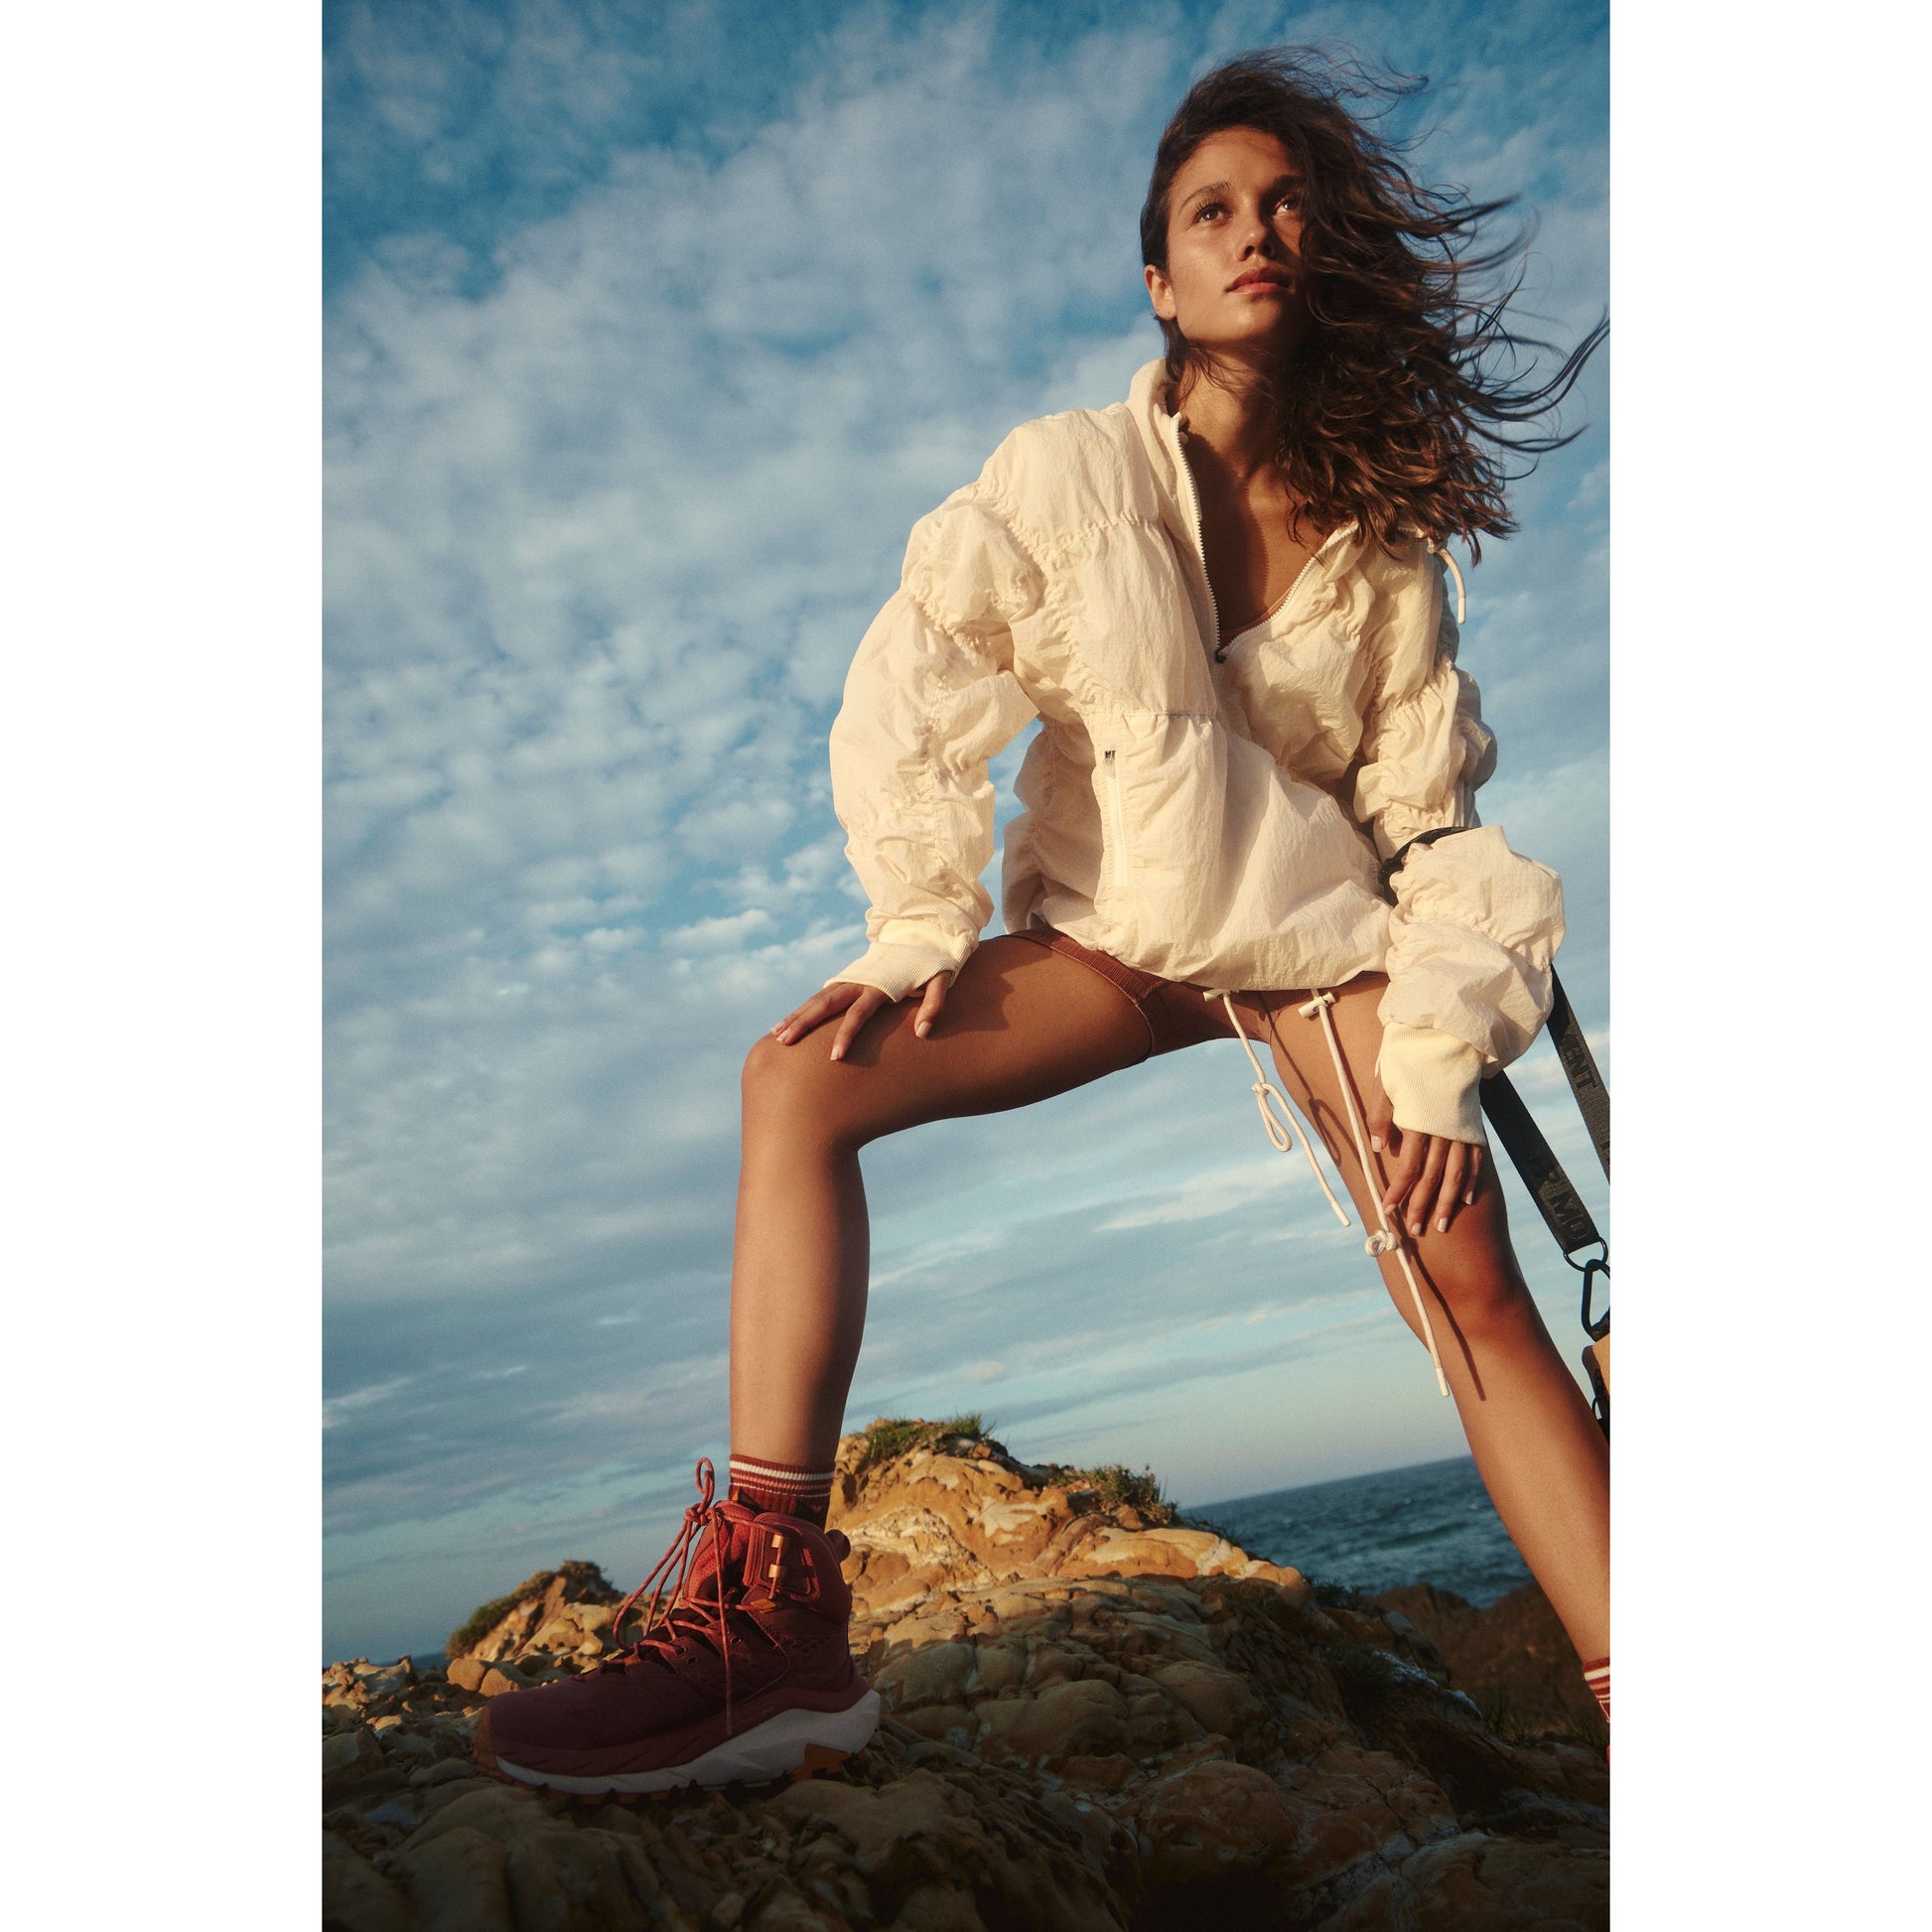 A young woman in a white blouse and red hiking boots, wearing a Free People Movement Happy Camper Pullover in Bleached Clay, poses on rocky coastal terrain under a clear sky.